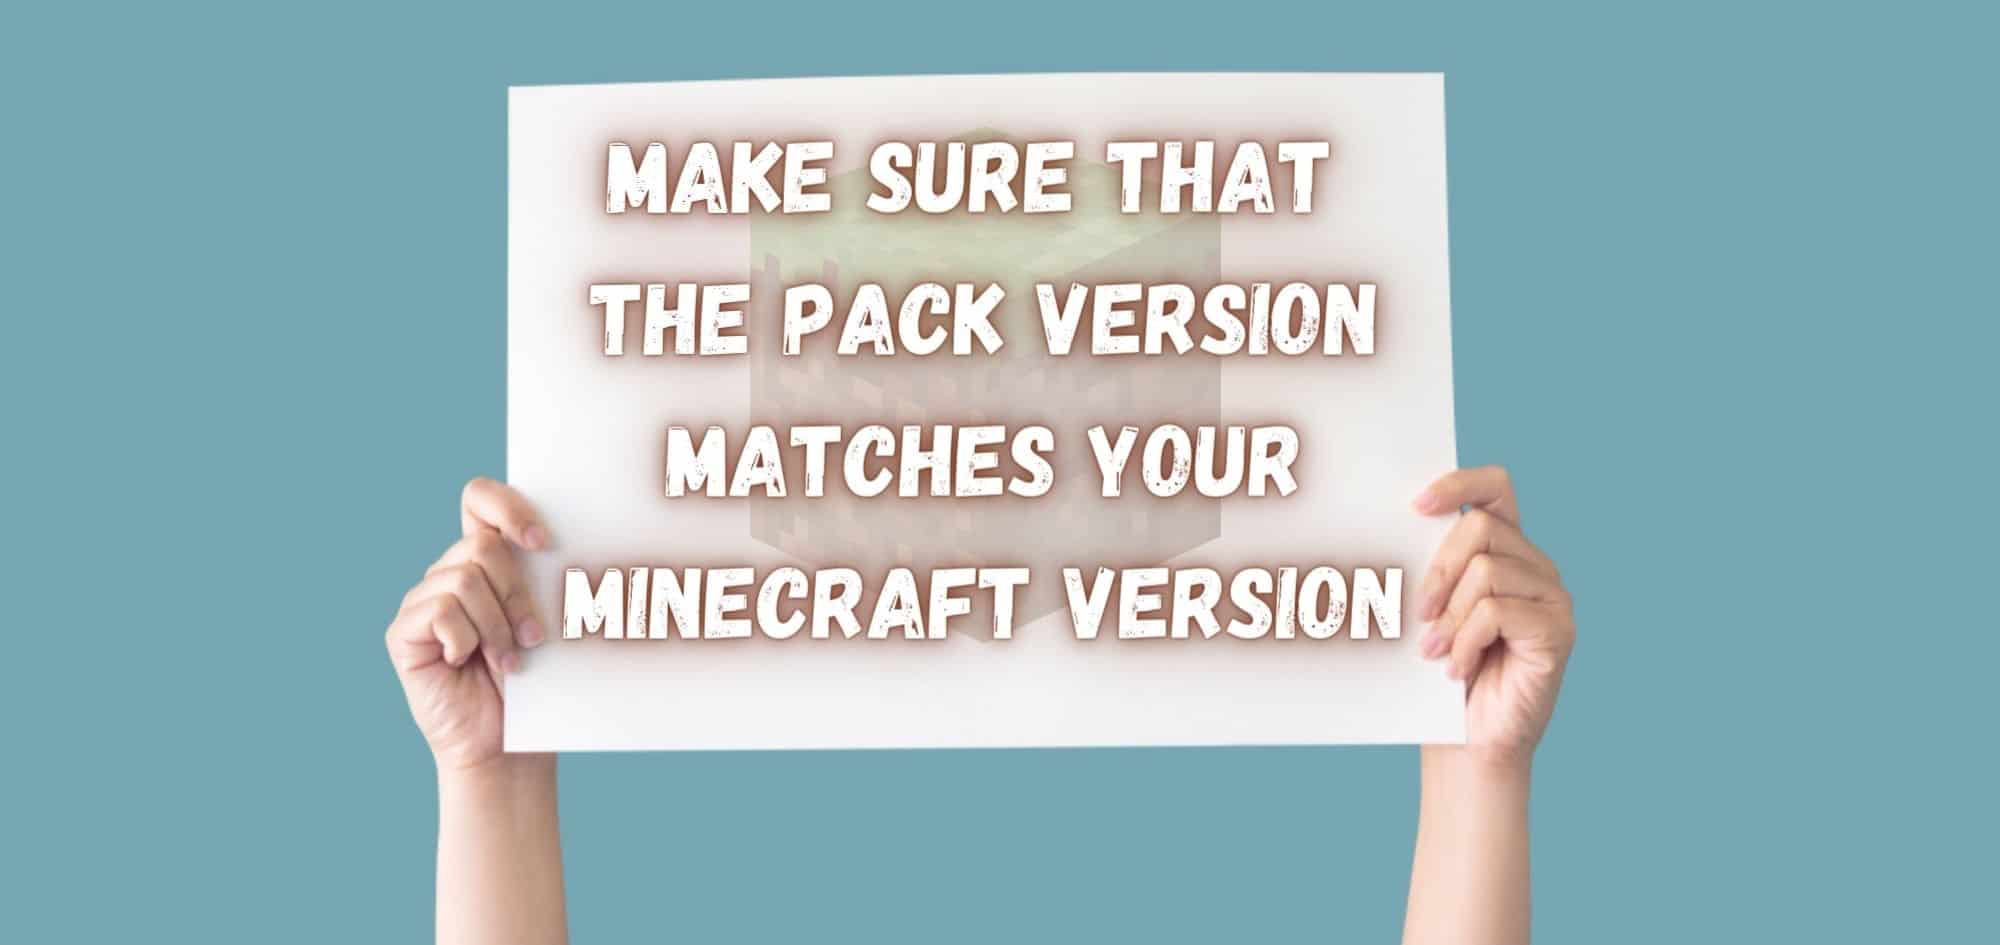 Make sure that the pack version matches your Minecraft version